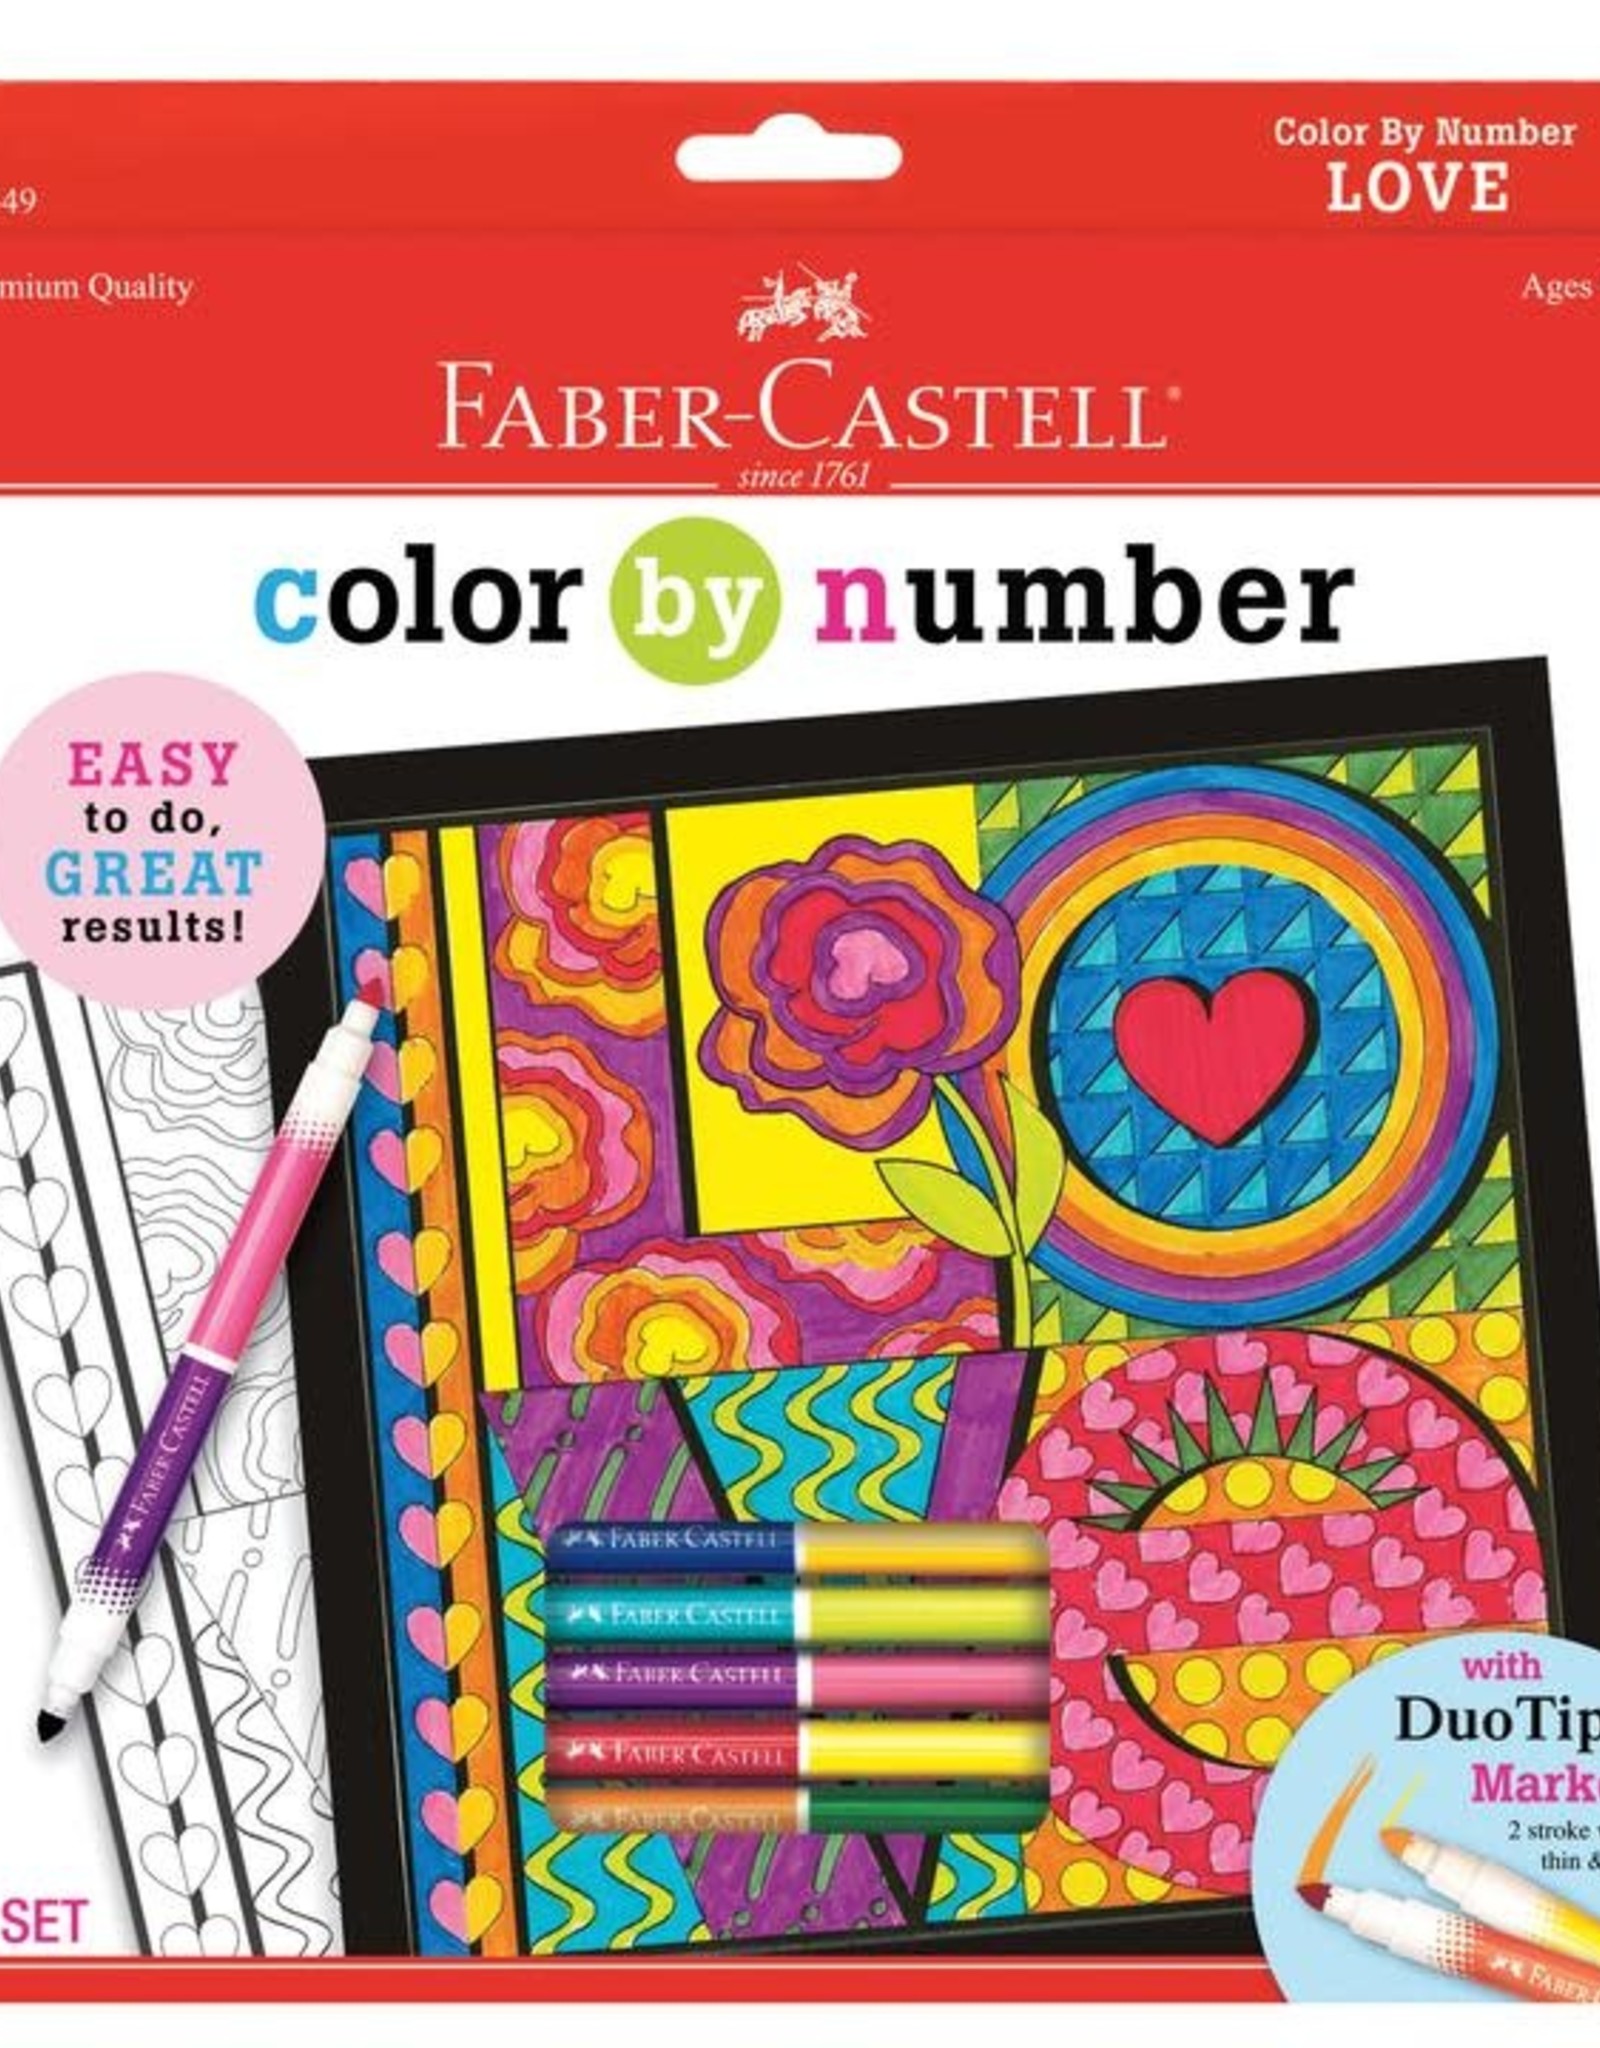 Faber-Castell Color By Number LOVE